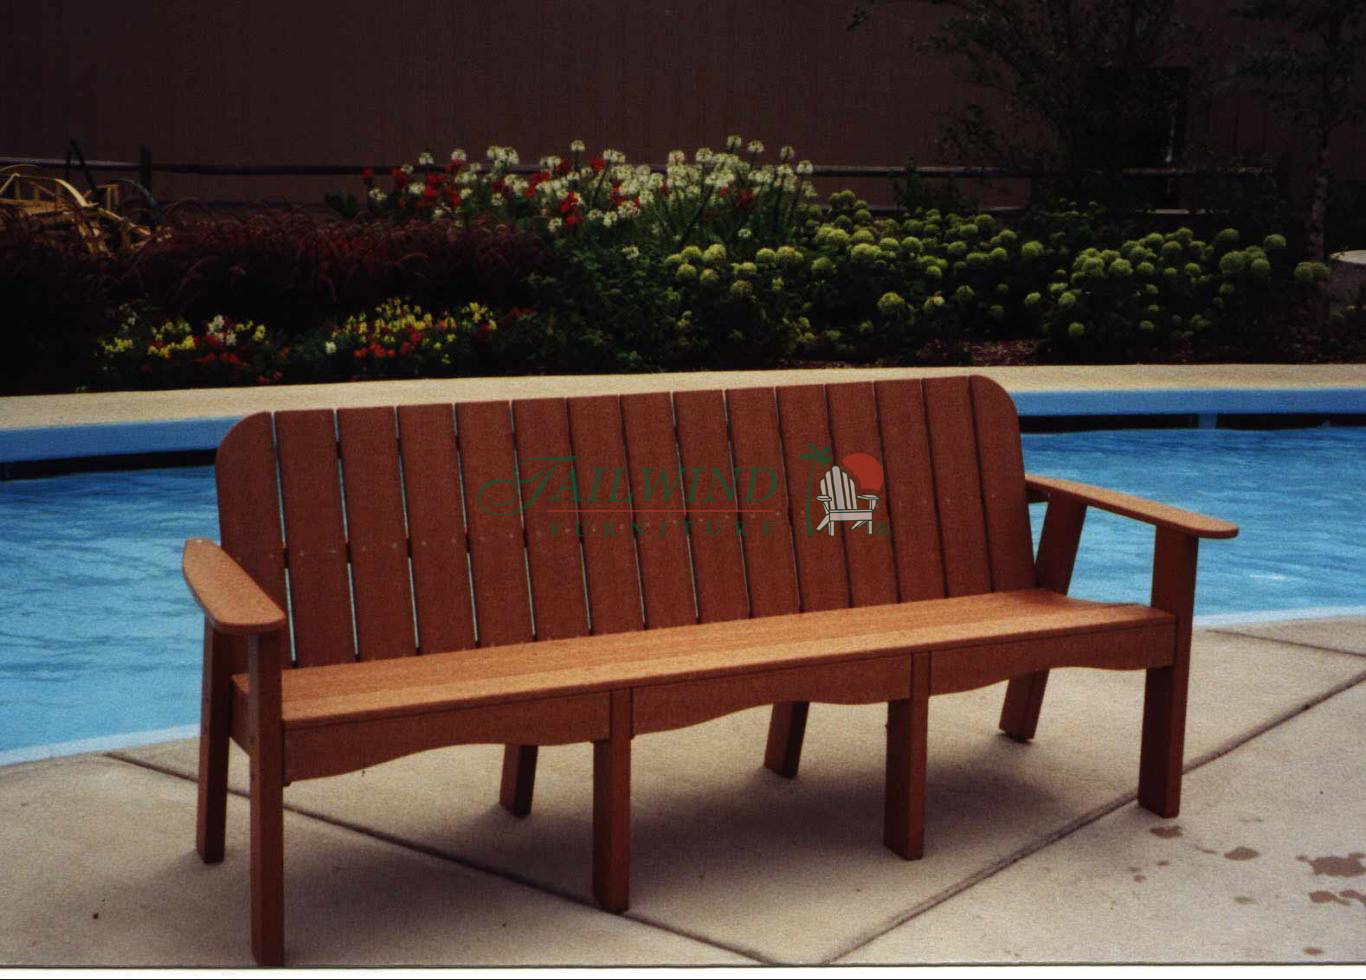 VB 720 76" Victorian Bench (seats four) - 76"L x 27"W x 34"H
Seat Height 17"
Weight 95 lbs.
Ships via freight truck

<br><br><img alt="Tailwind Colors" src="/upload/image/tailwind-color-samples-gwsc.jpg" />